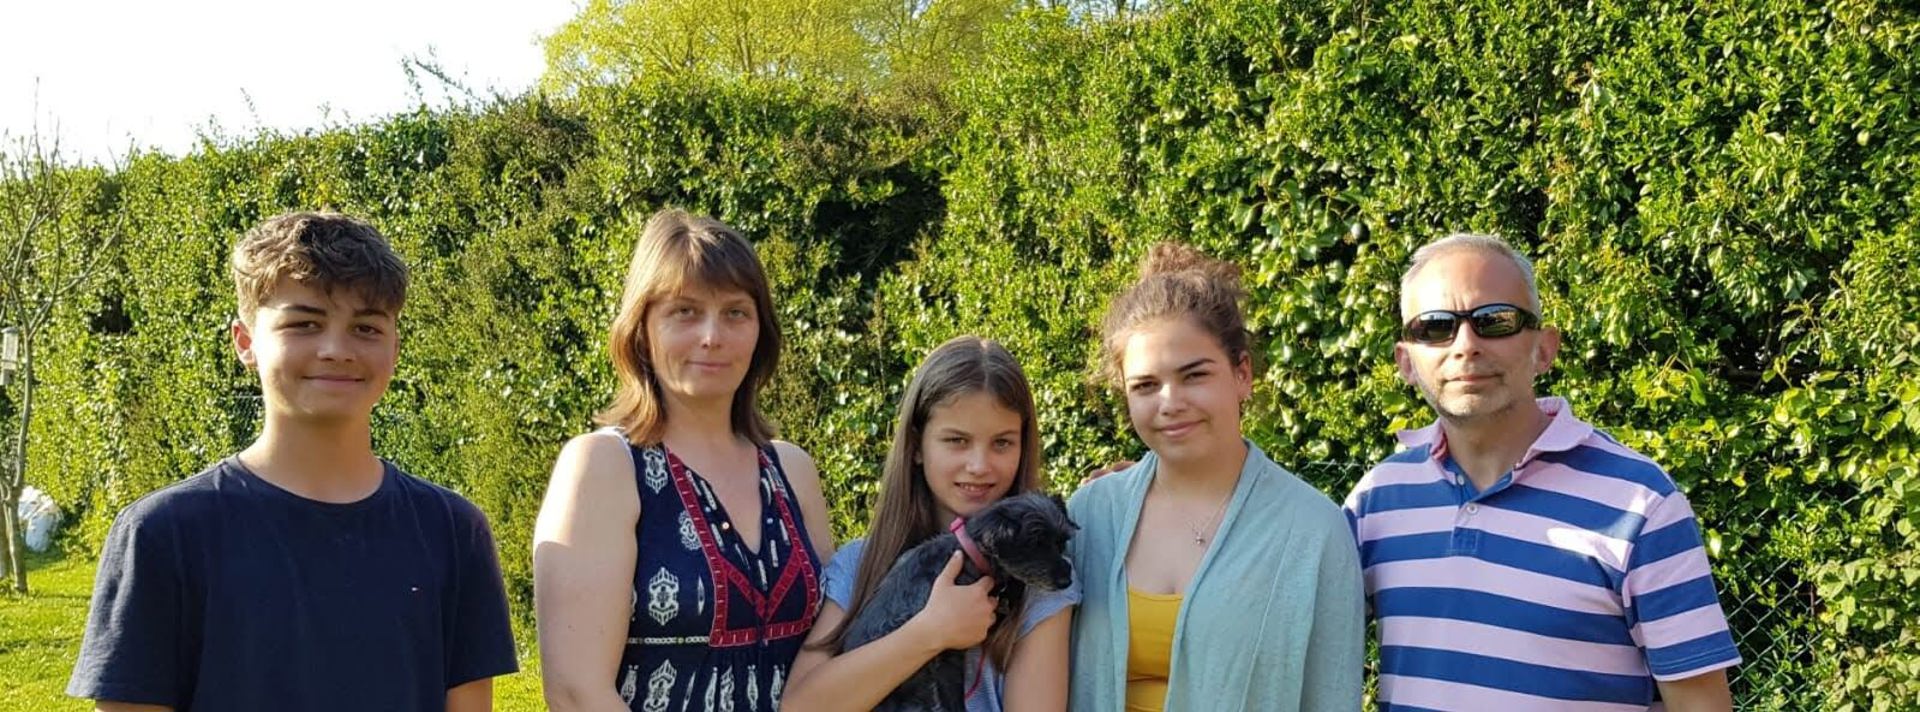 A family and their dog stood in a garden against a green hedge